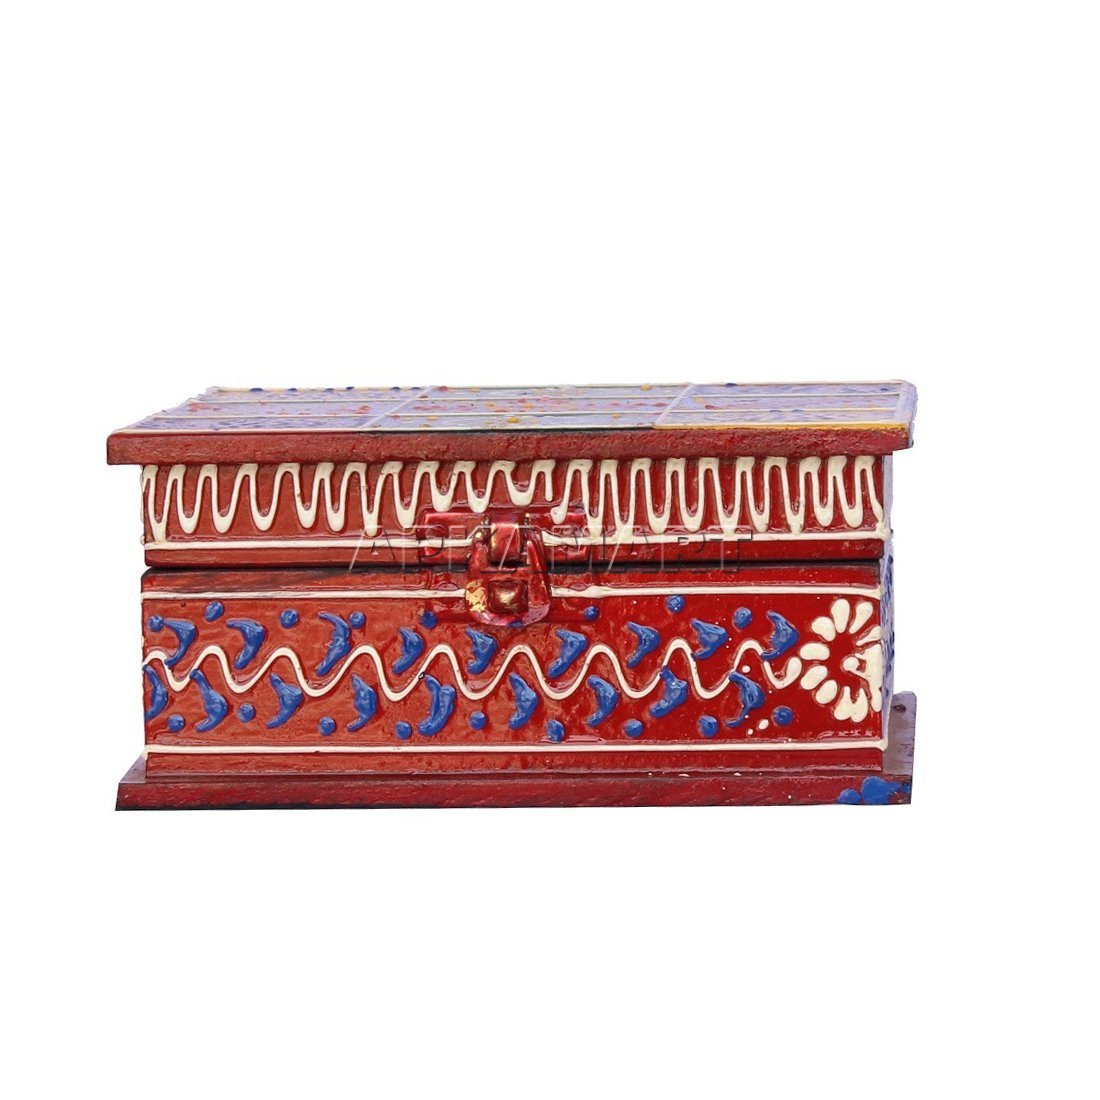 Decorative Box |Wooden Box | Jewellery Box with Lock for Mother's Day Gift -6 Inch - ApkaMart